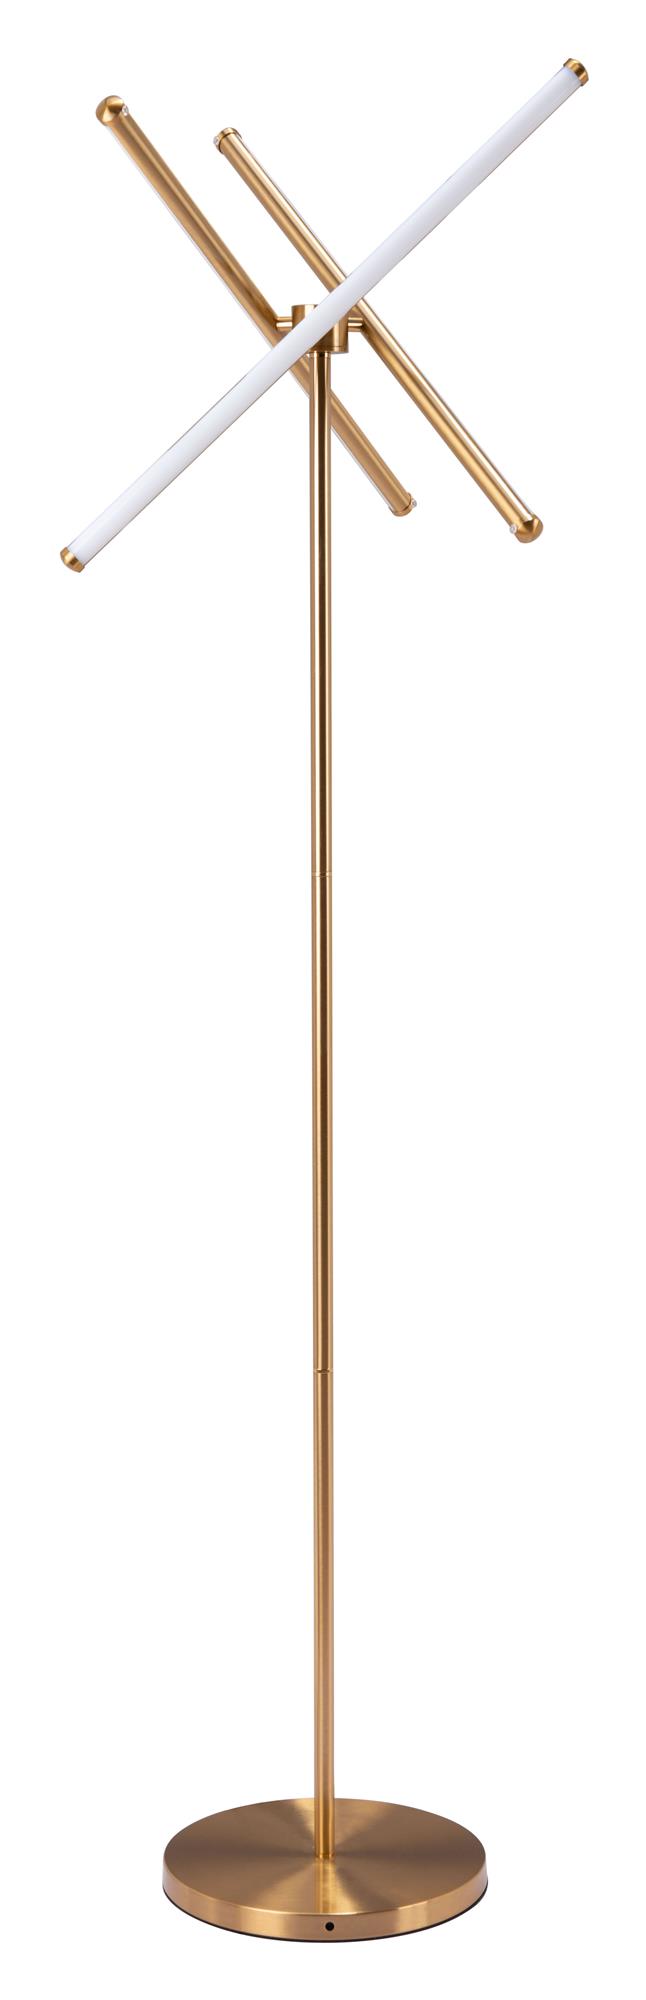 Brass finish floor lamp by Isabelle with foot control -  N/A